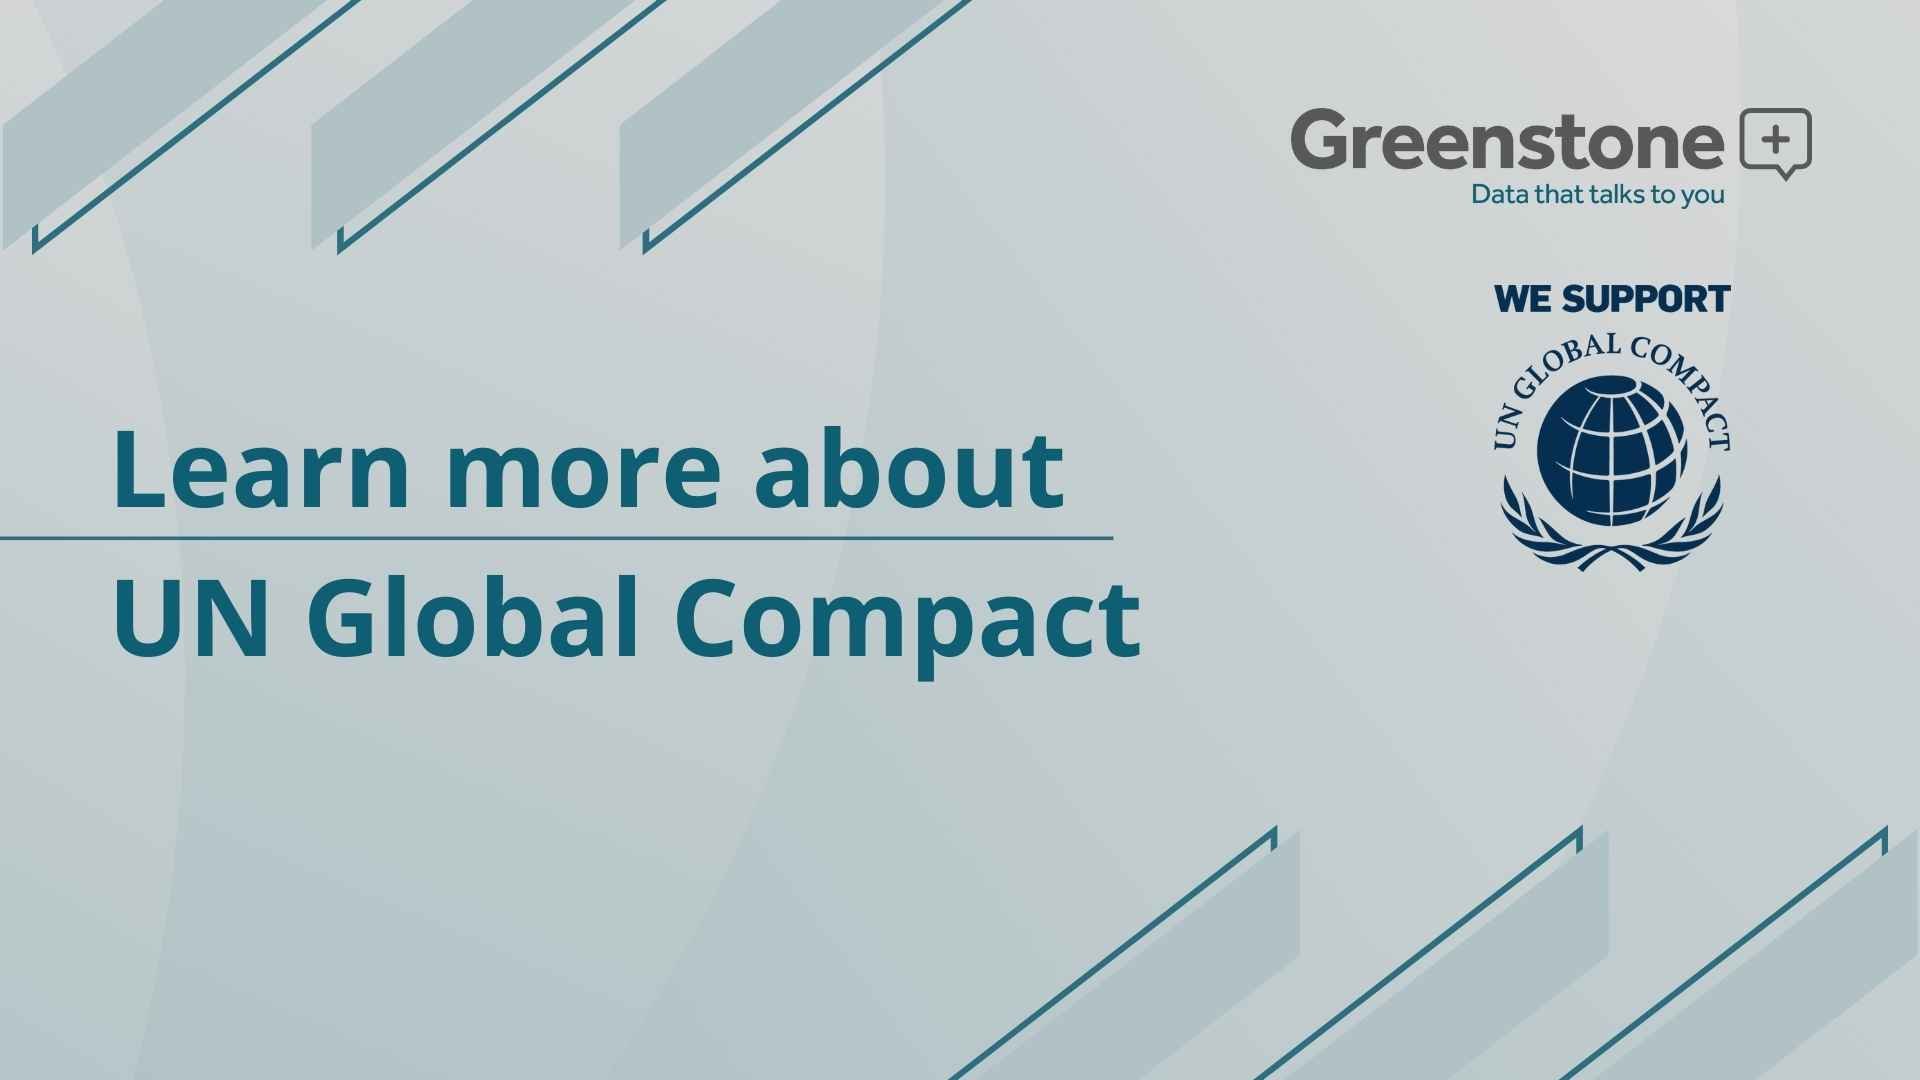 Greenstone & The UN Global Compact (UNGC)